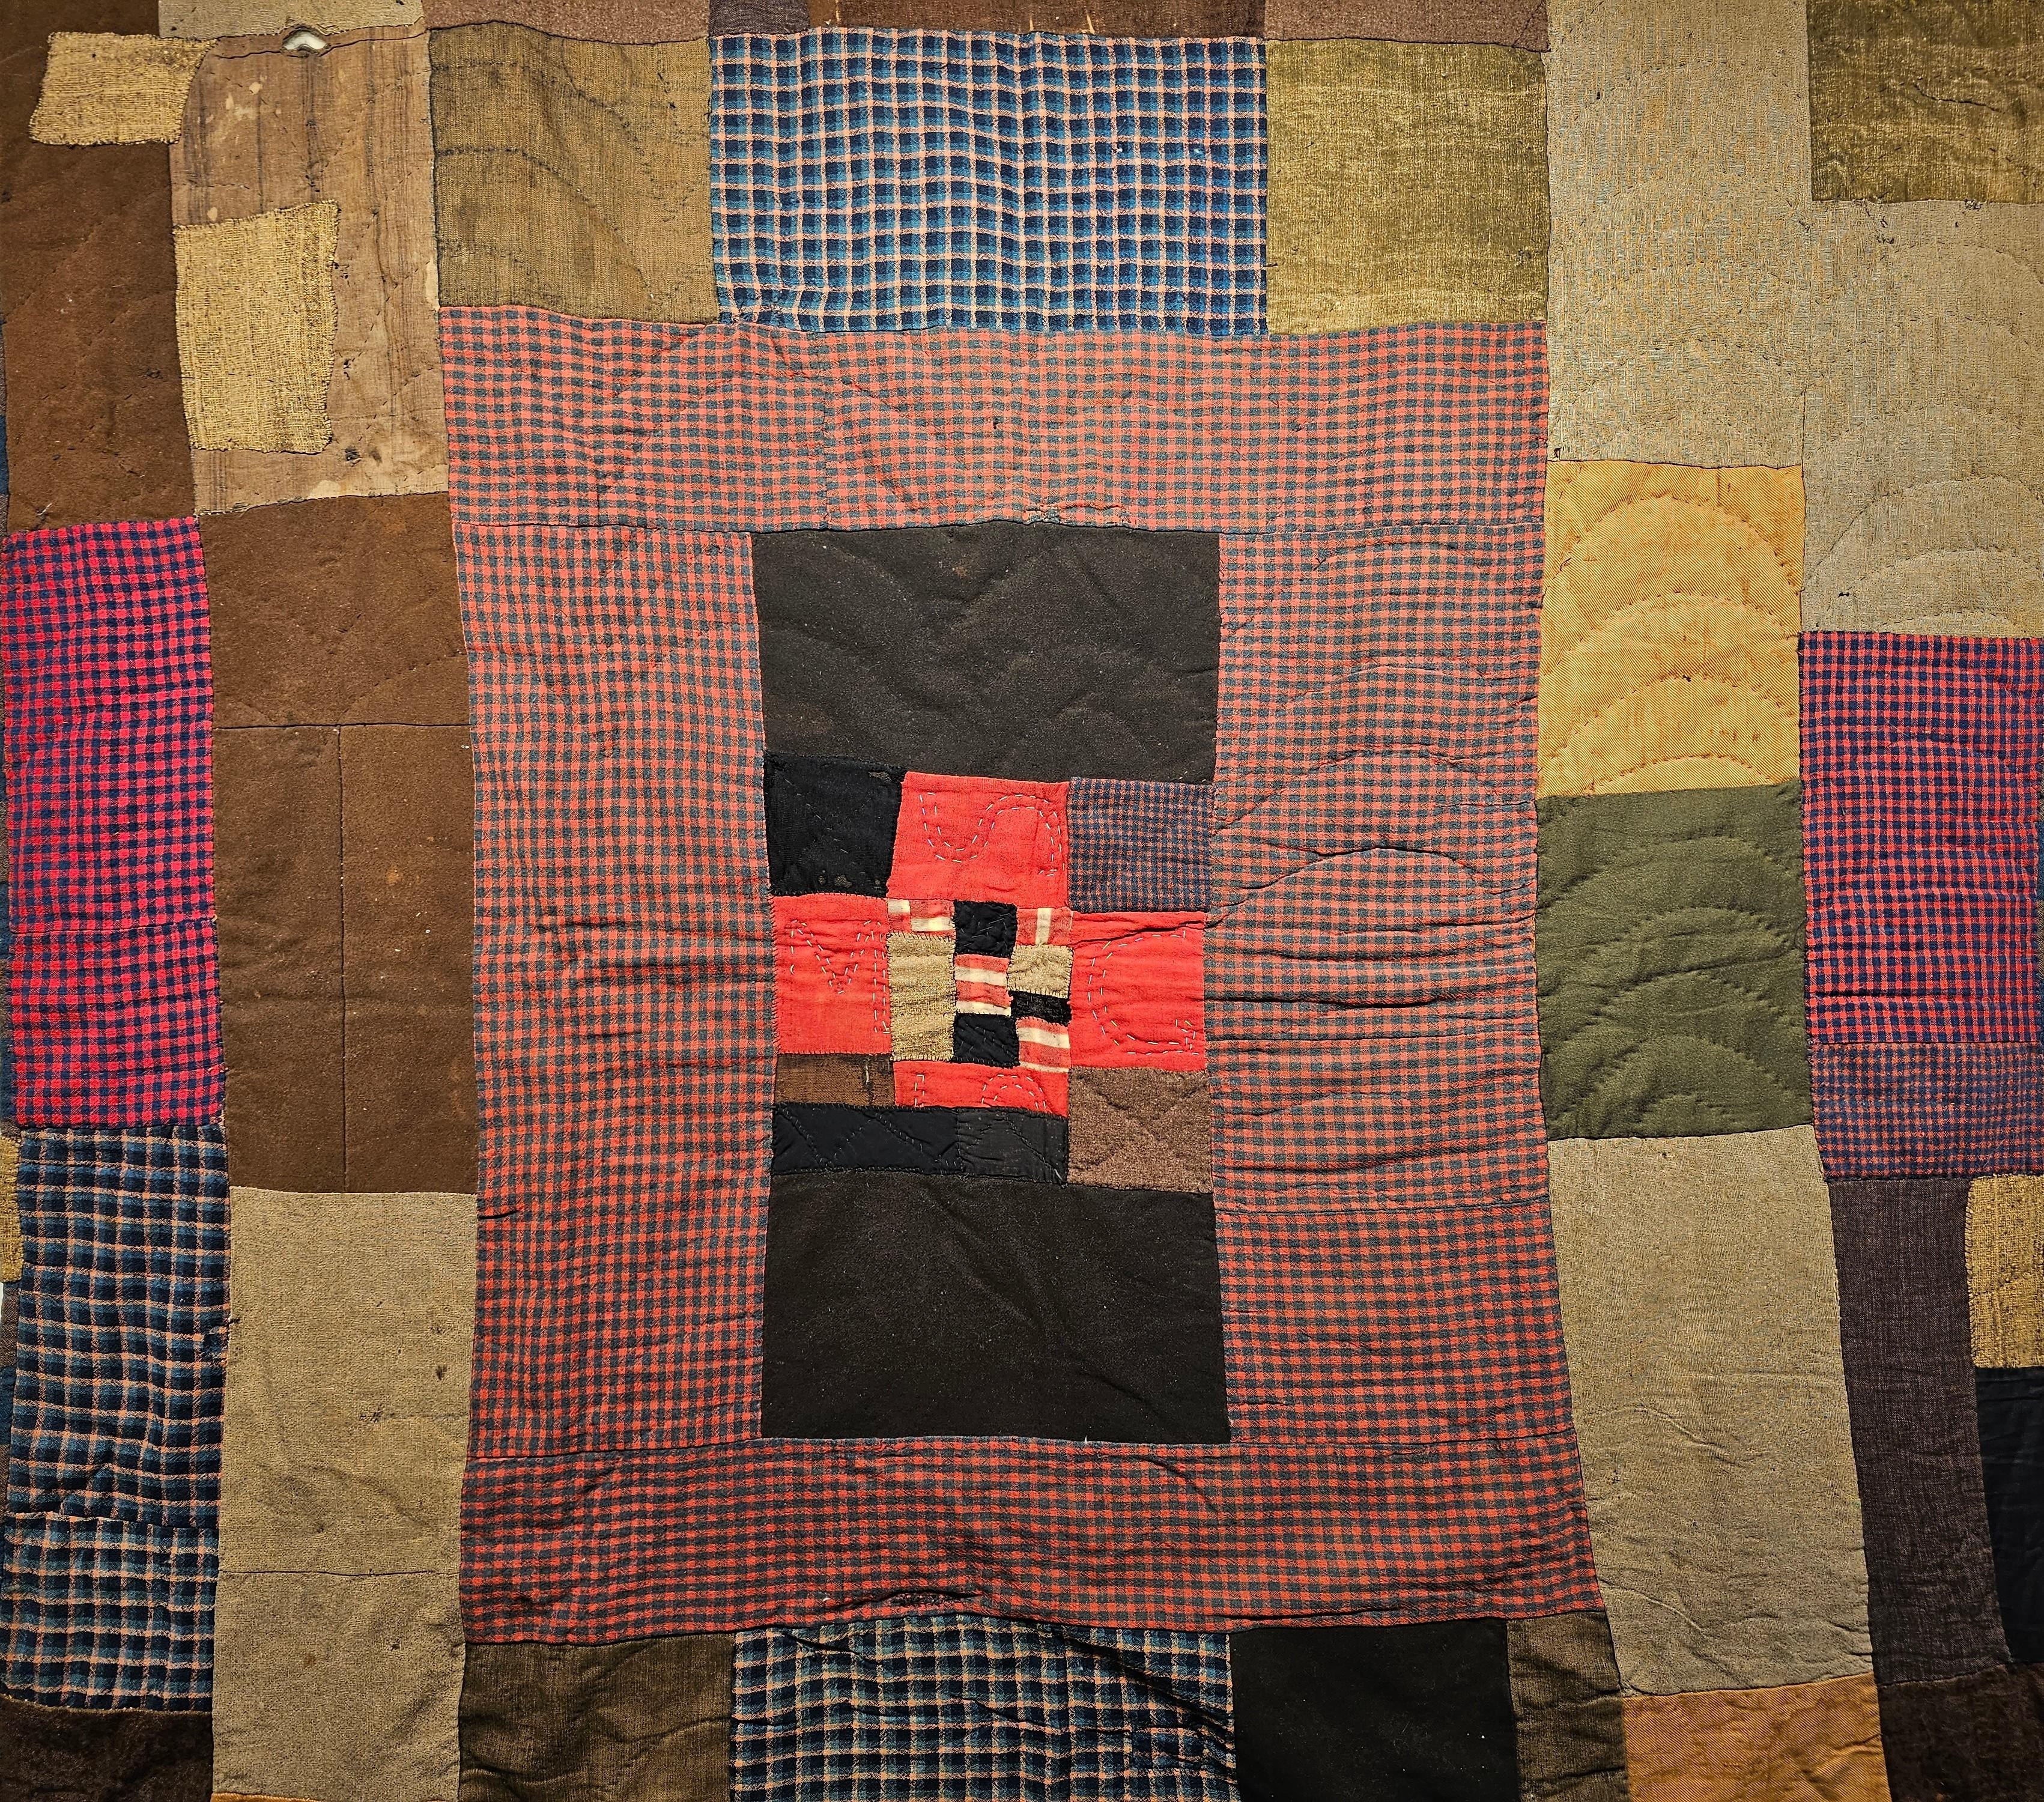 A 25% Discount Sale is Valid only from Dec 19-21, 2023 
FREE 2 Day US Continental Shipping for Delivery By Dec 24, 2023

 African American Southern quilt from the American Civil War era from the deep south, possibly Alabama.  The quilt is hand